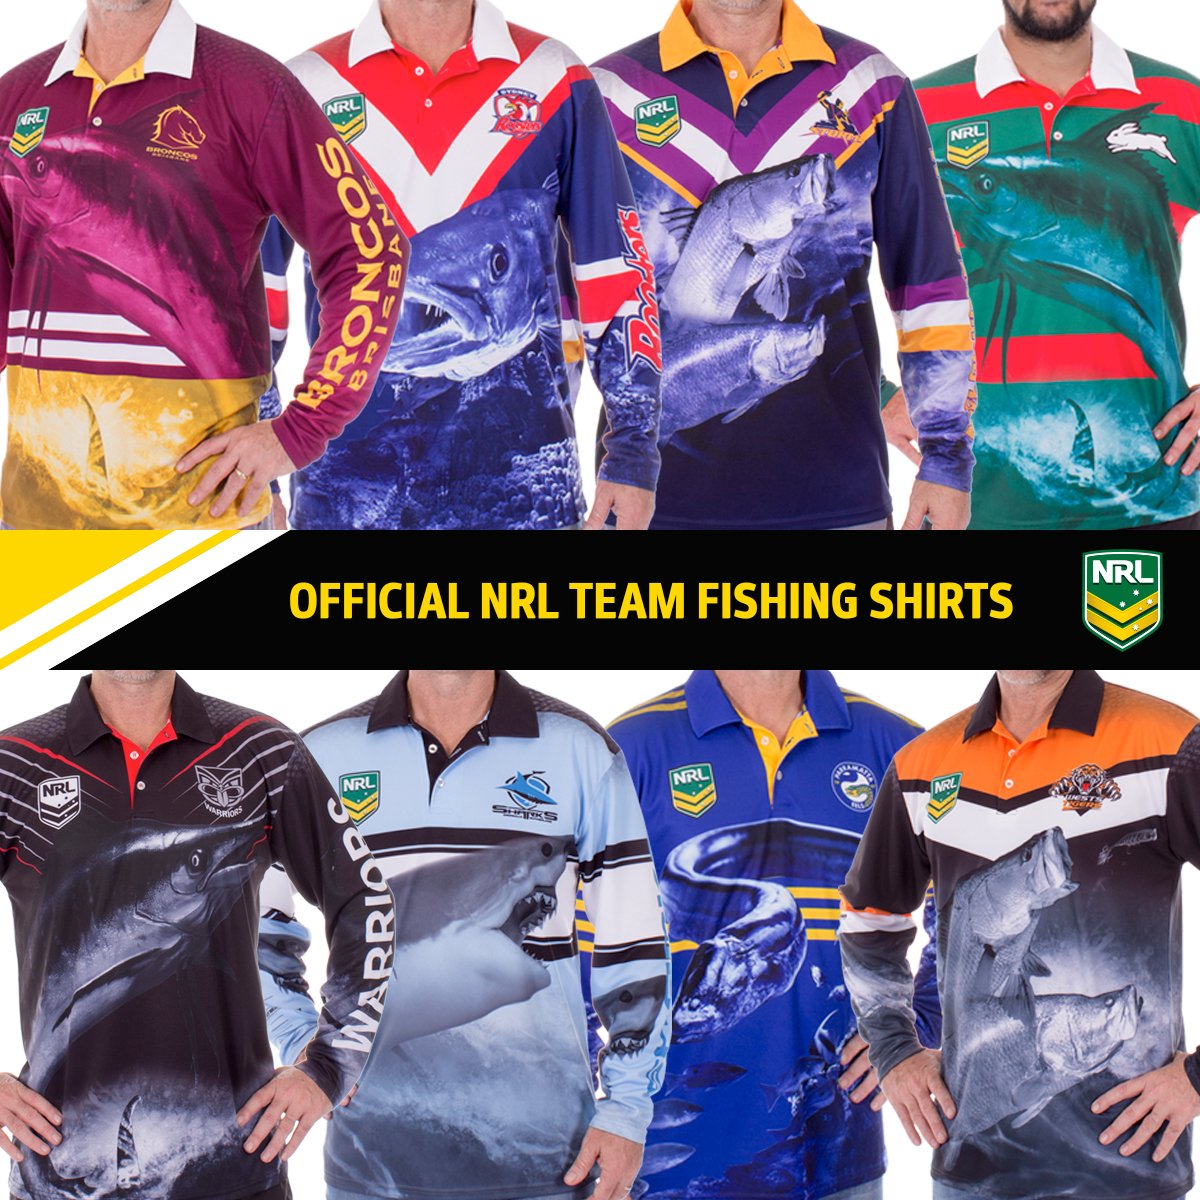 NRL on X: Catch of the day - #NRL Club fishing shirts! 🐠 Get yours:    / X